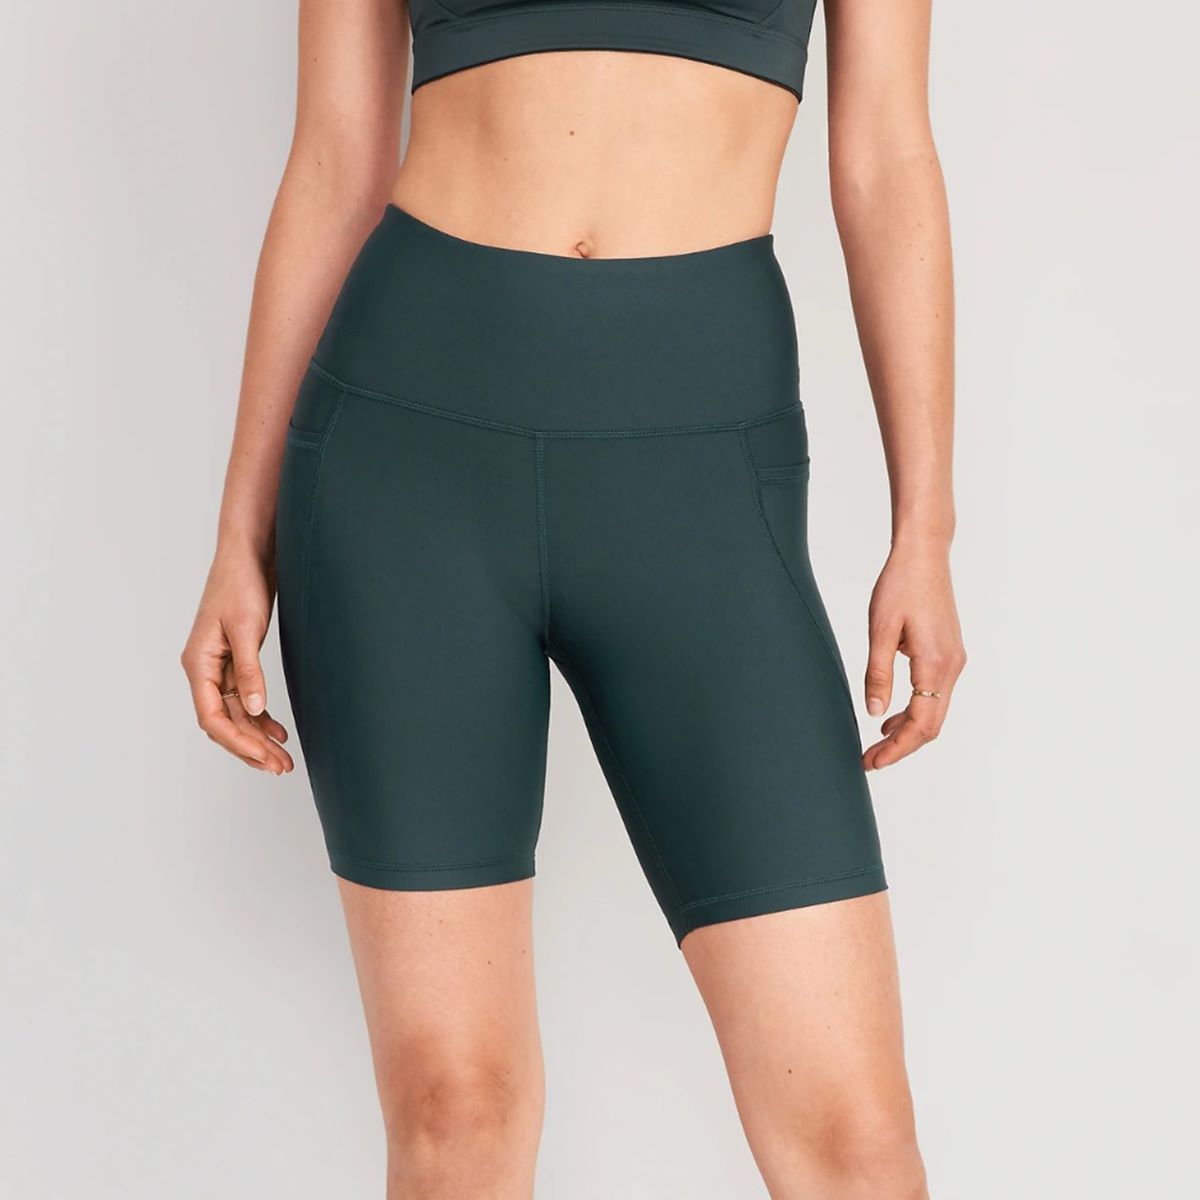 15 Unbelievable High Waist Compression Shorts For 2023